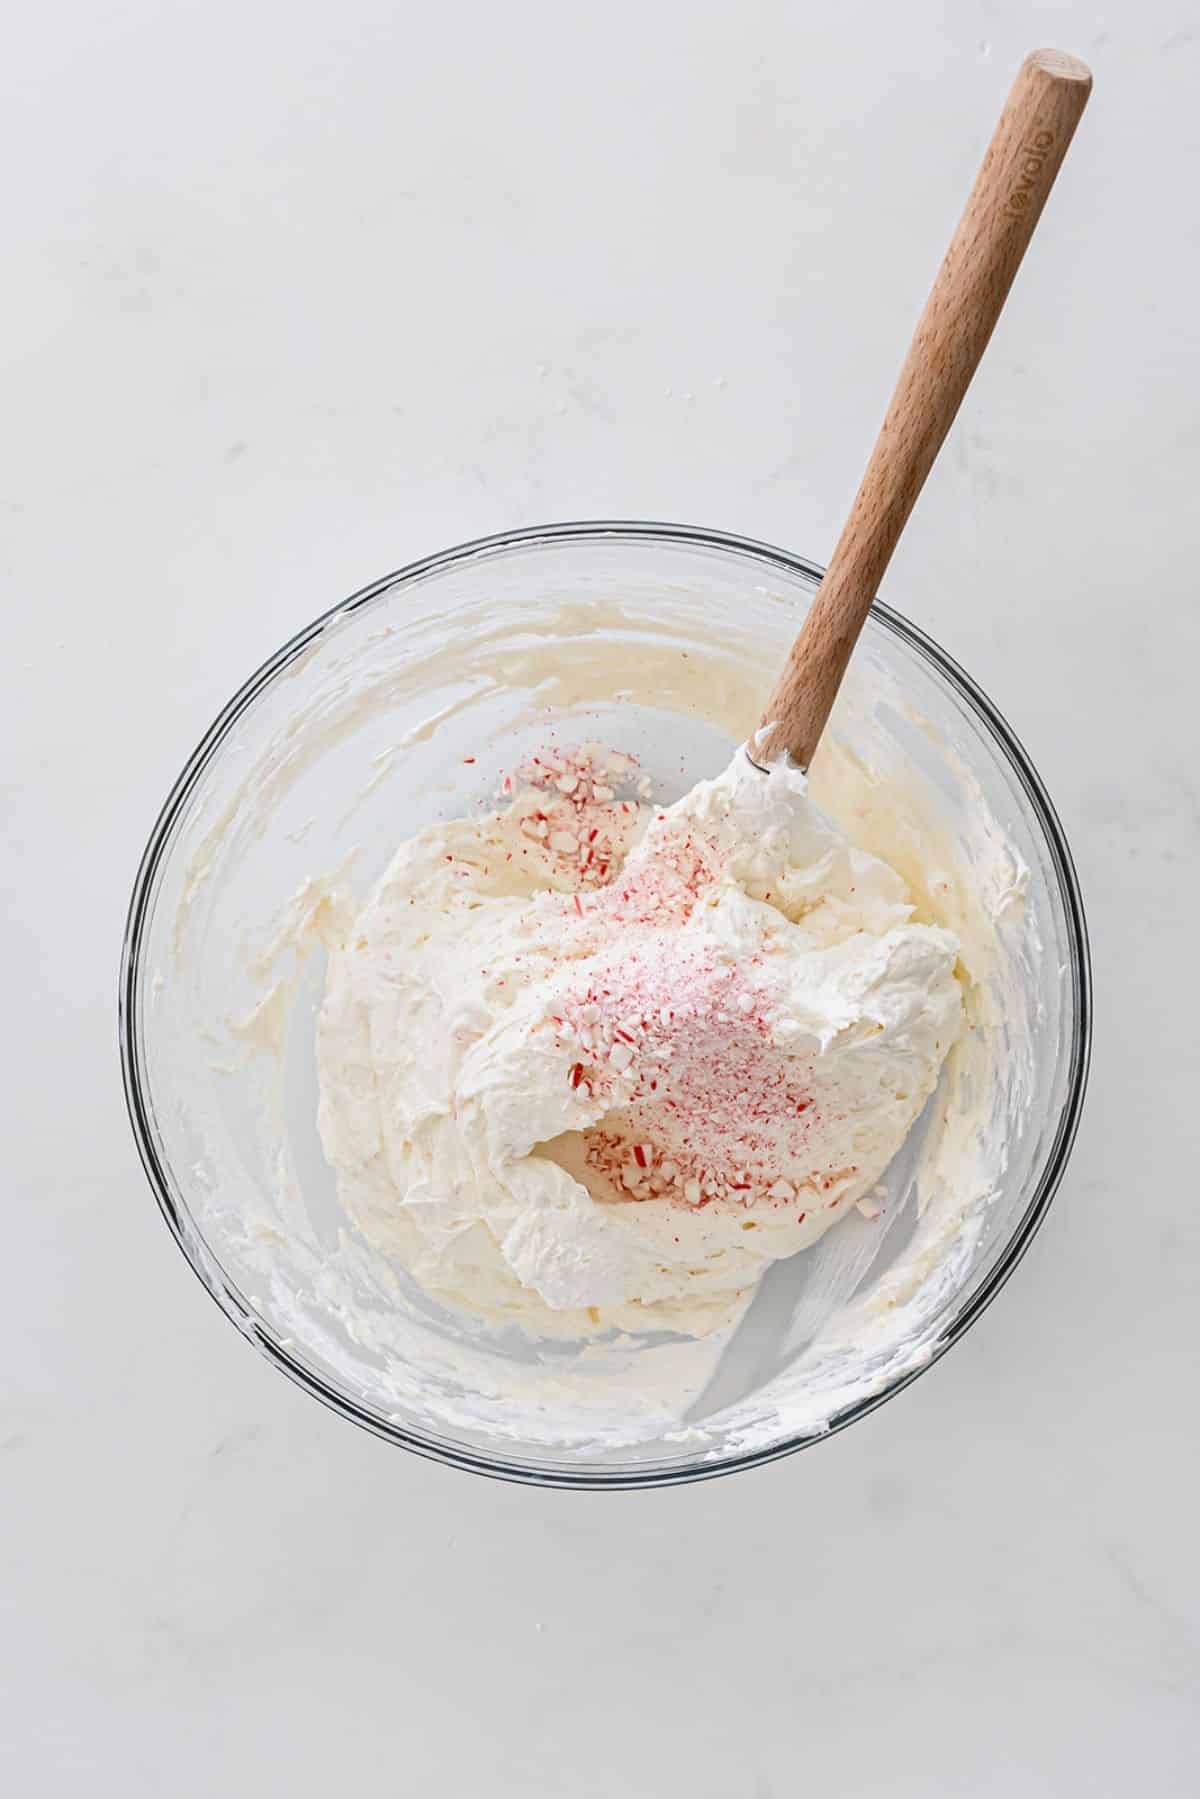 Mix together half of the Cool Whip and crushed candy canes.